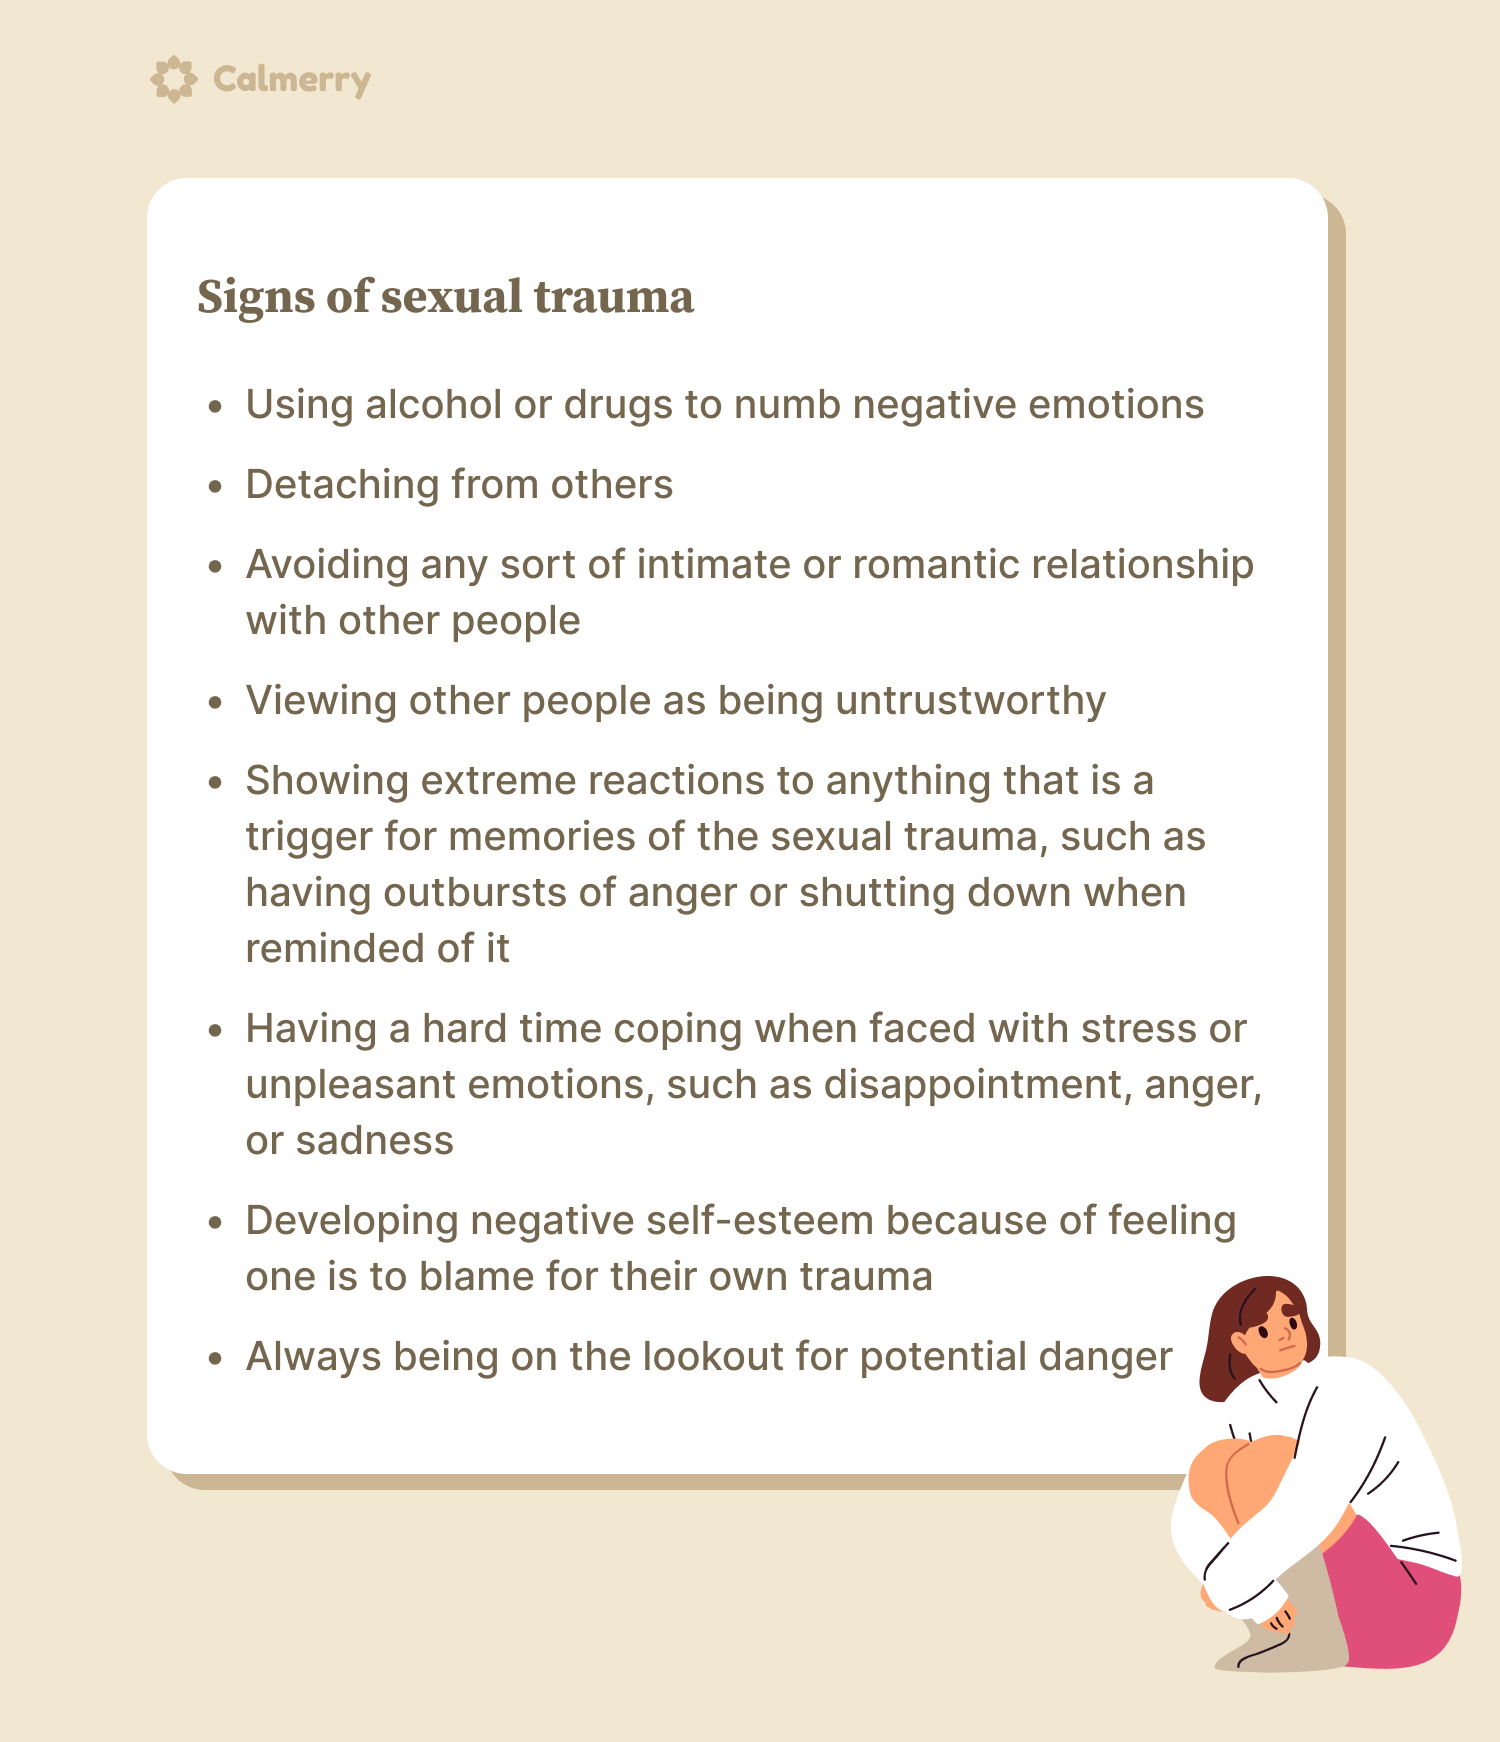 Signs of sexual trauma